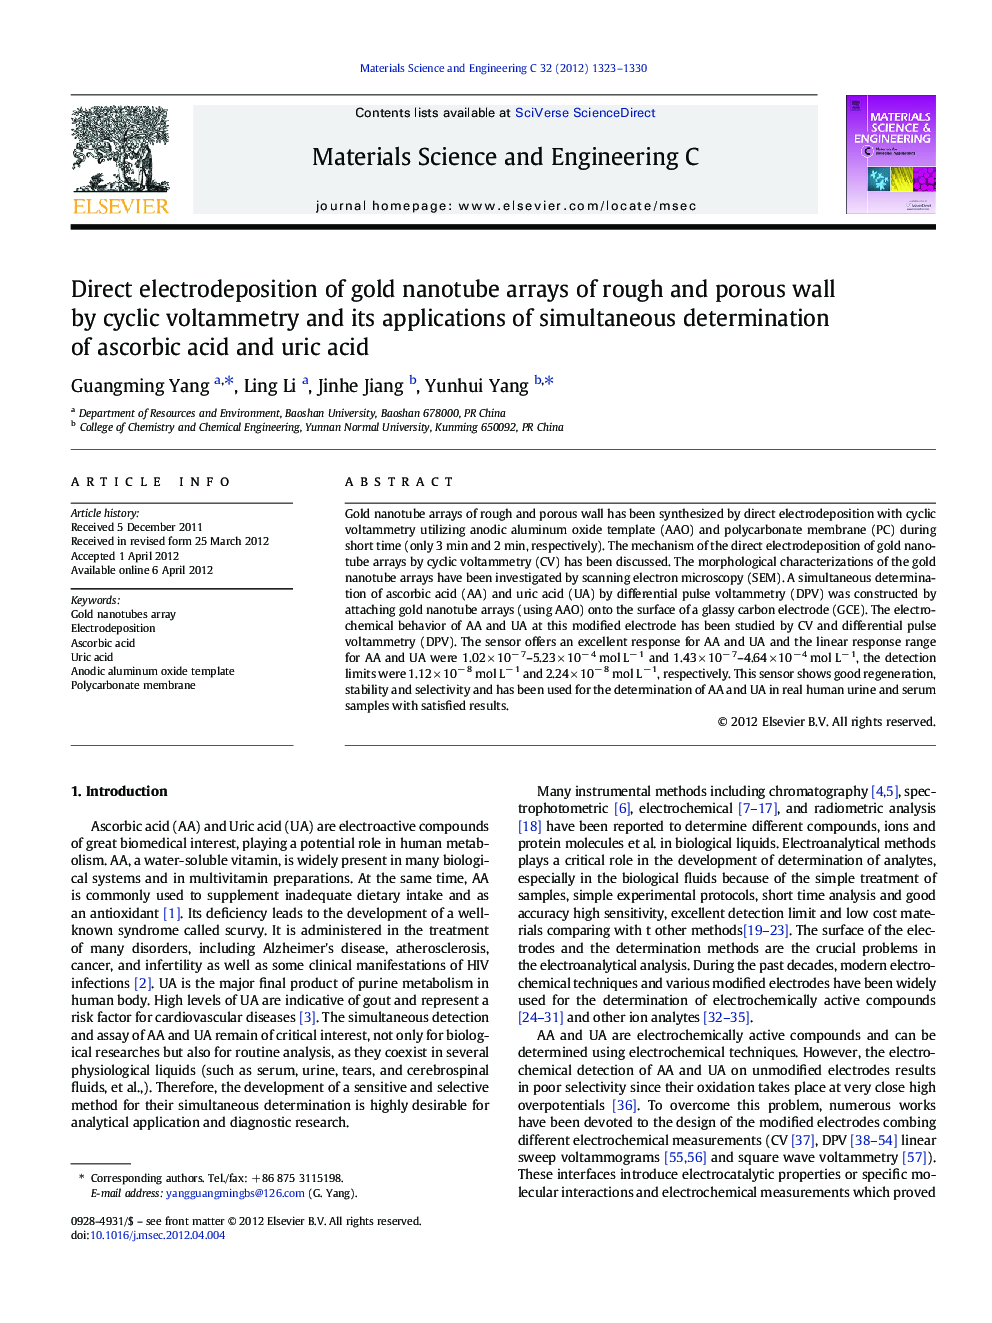 Direct electrodeposition of gold nanotube arrays of rough and porous wall by cyclic voltammetry and its applications of simultaneous determination of ascorbic acid and uric acid